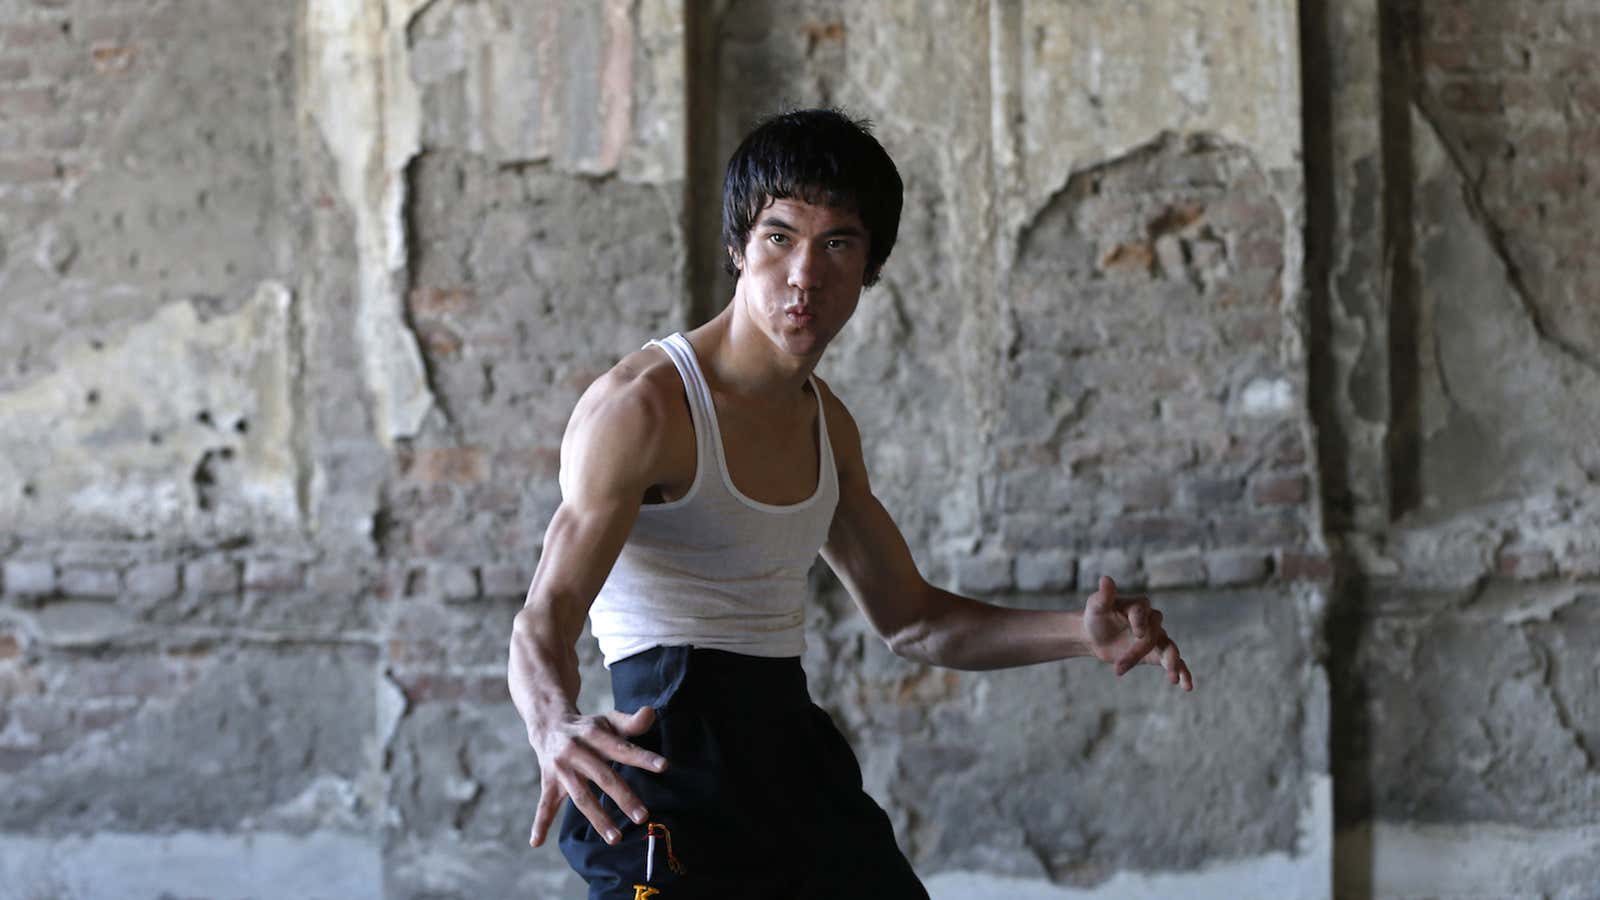 The second Bruce Lee.